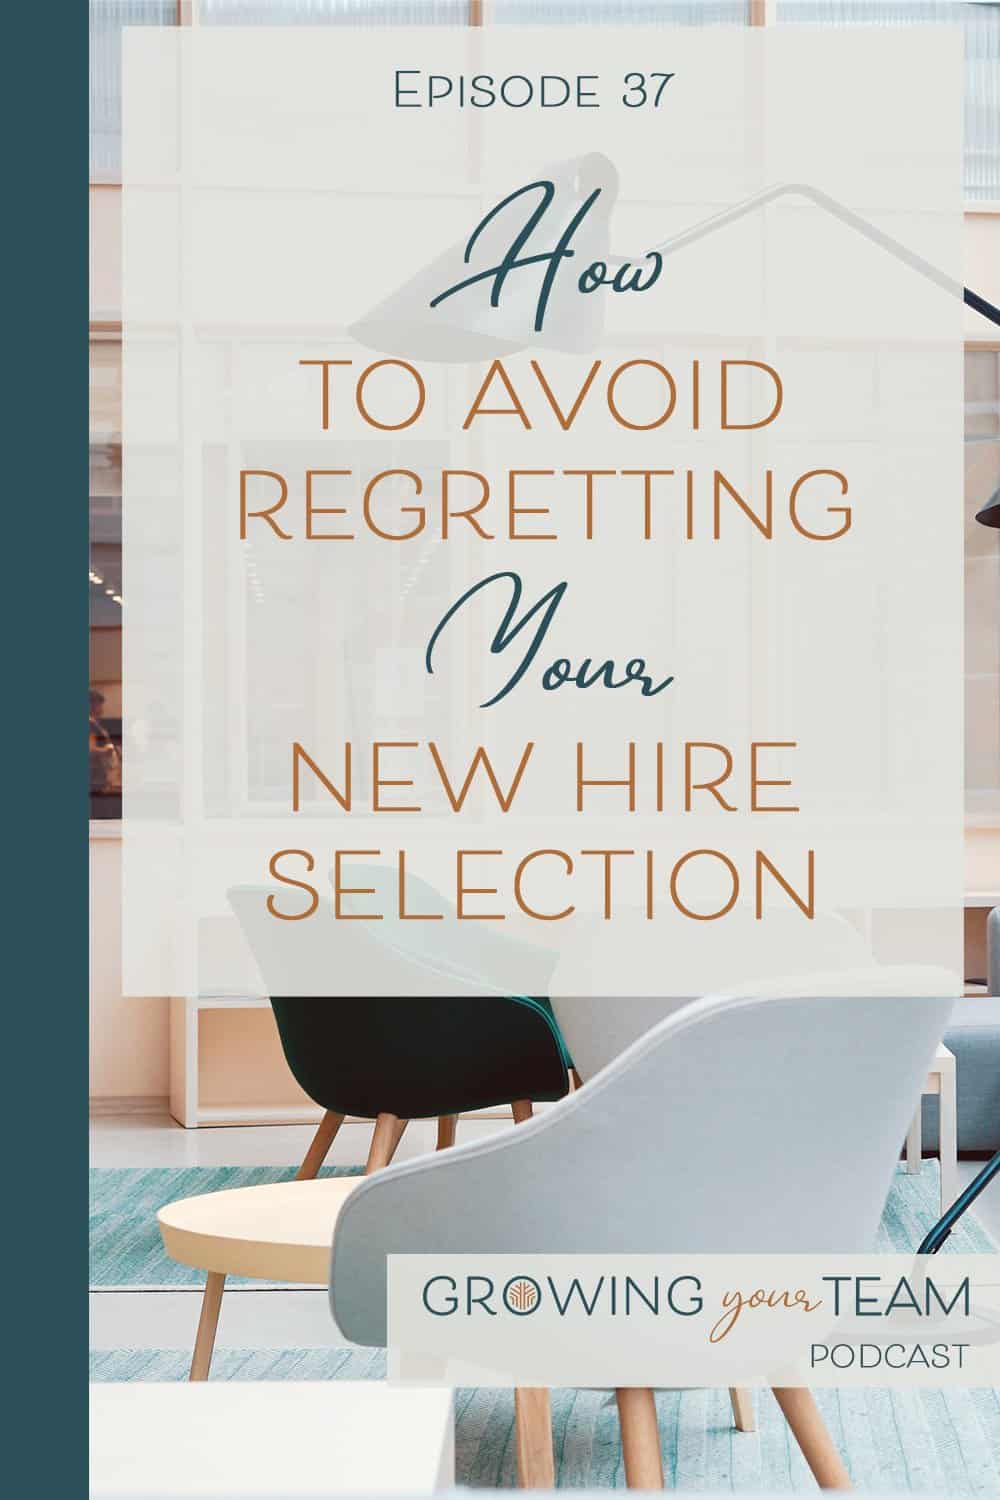 Regretting Your New Hire, Growing You Team Podcast, Jamie Van Cuyk, Small Business